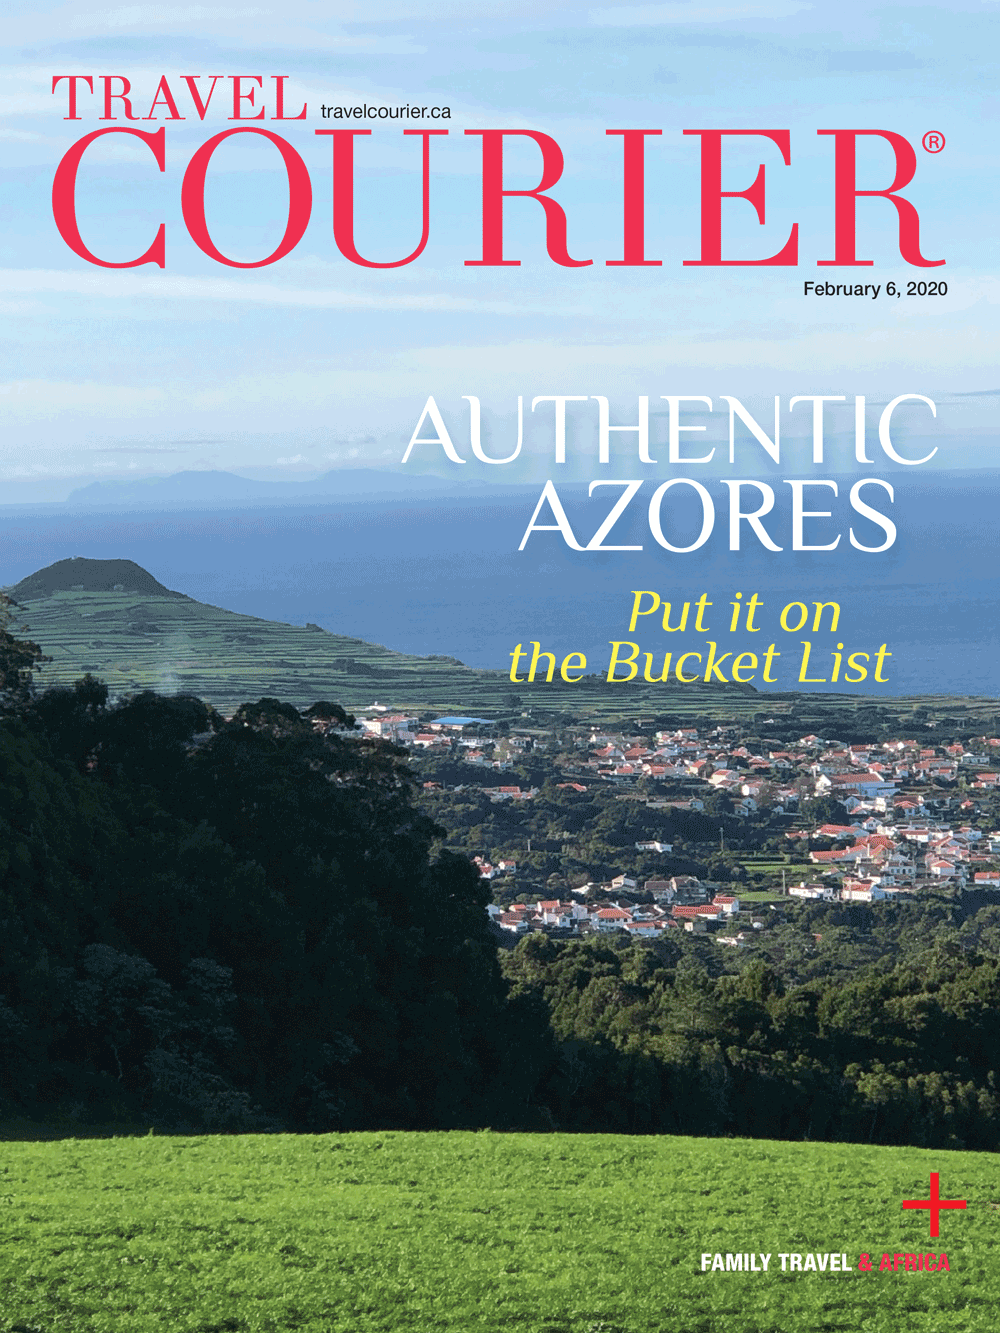 It’s all about authenticity in The Azores